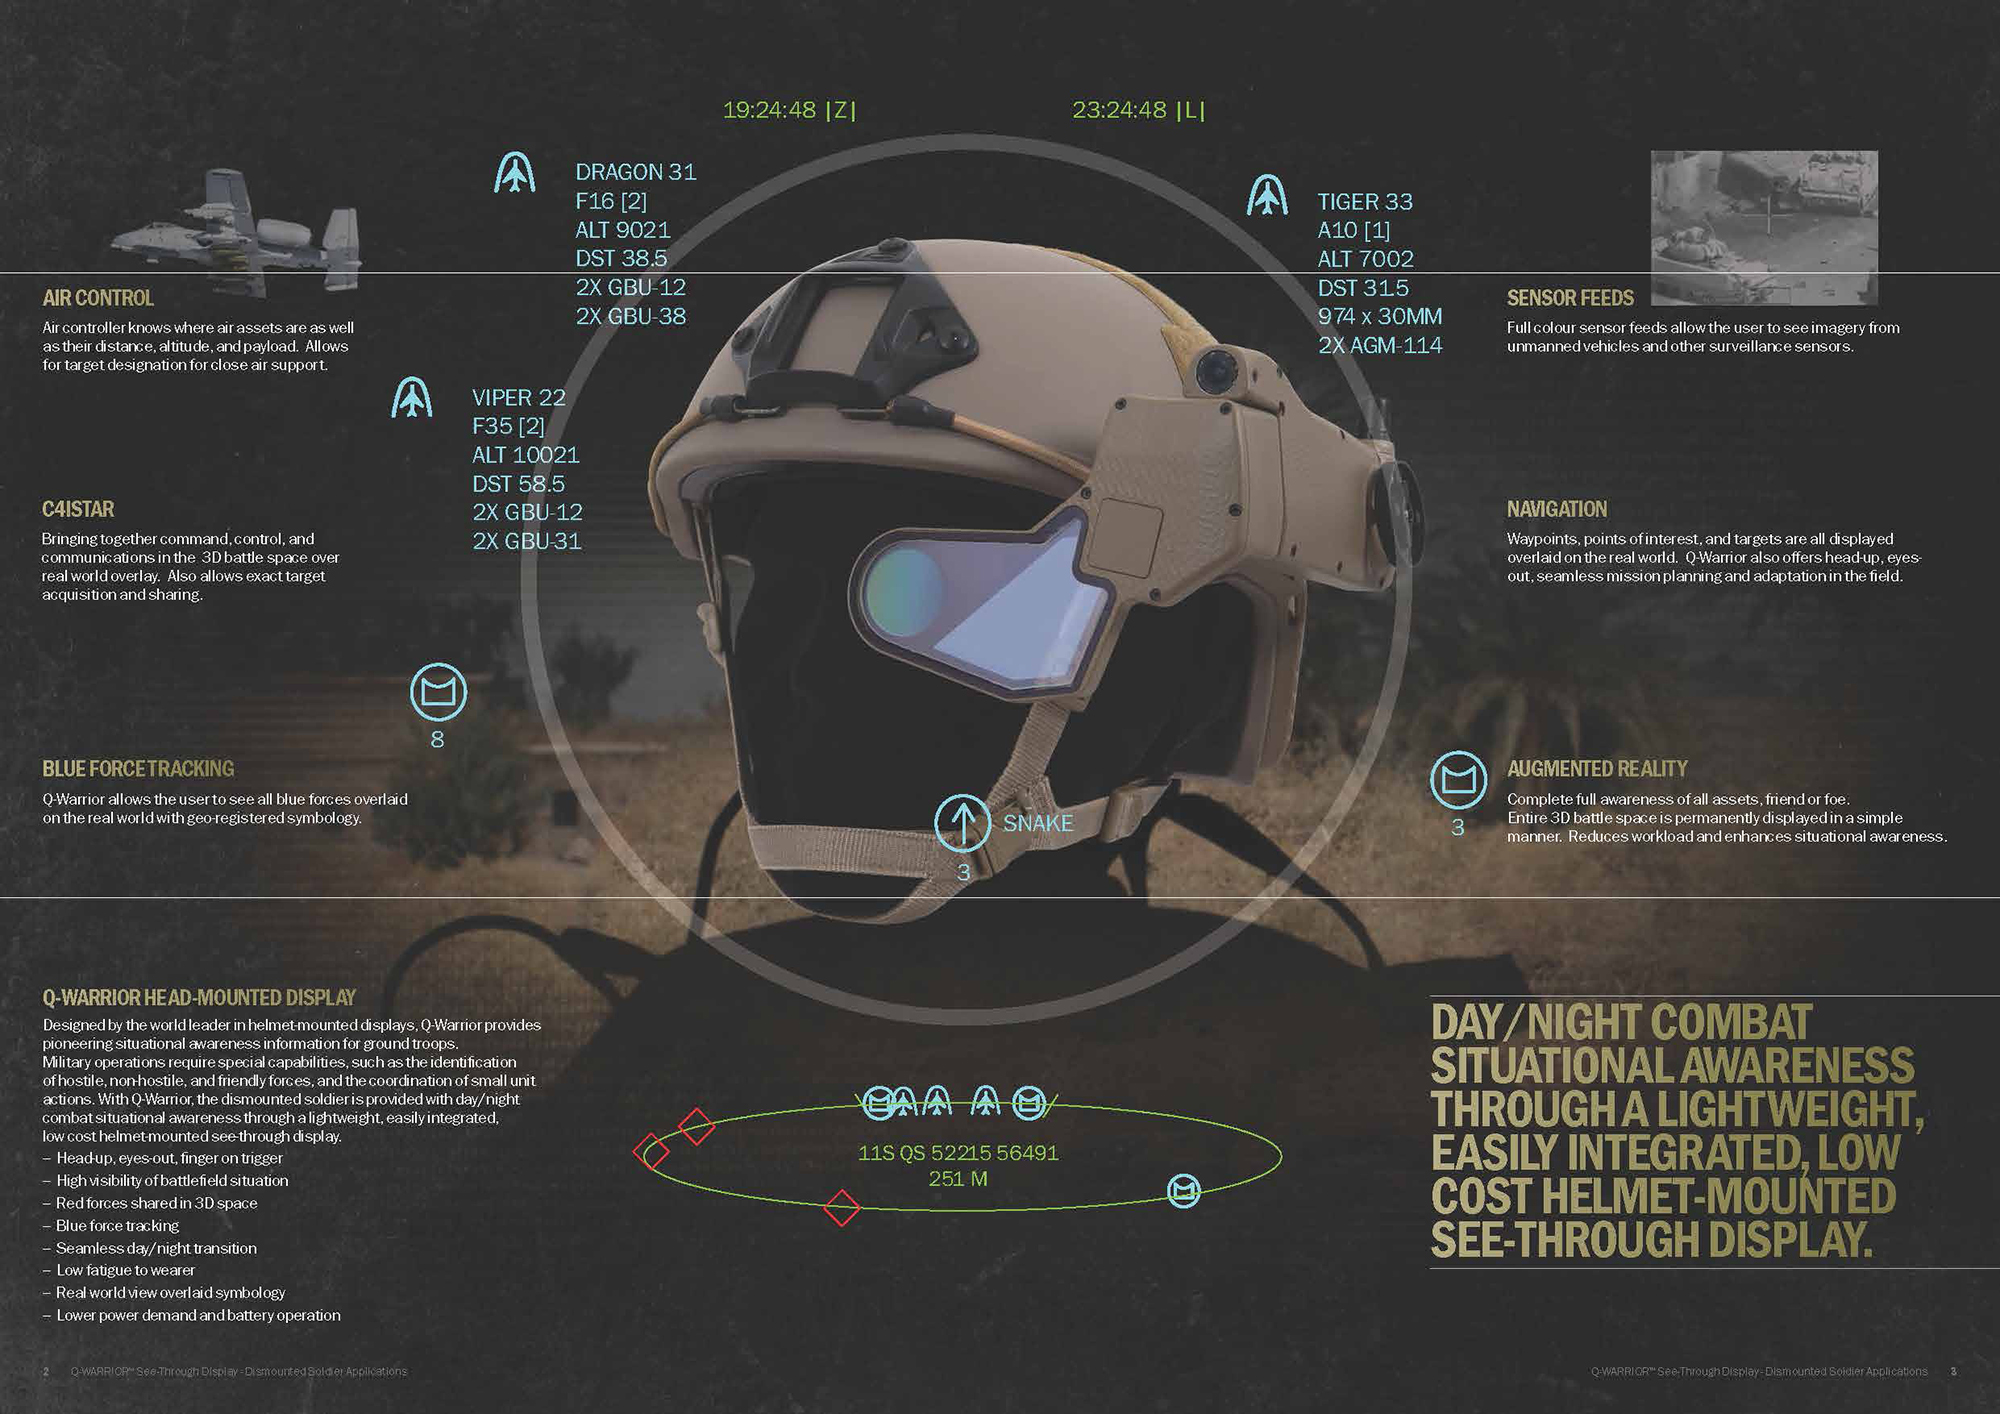 Monster Machines: This Battlefield Heads-Up Display Turns Troops Into Cyborg Soldiers